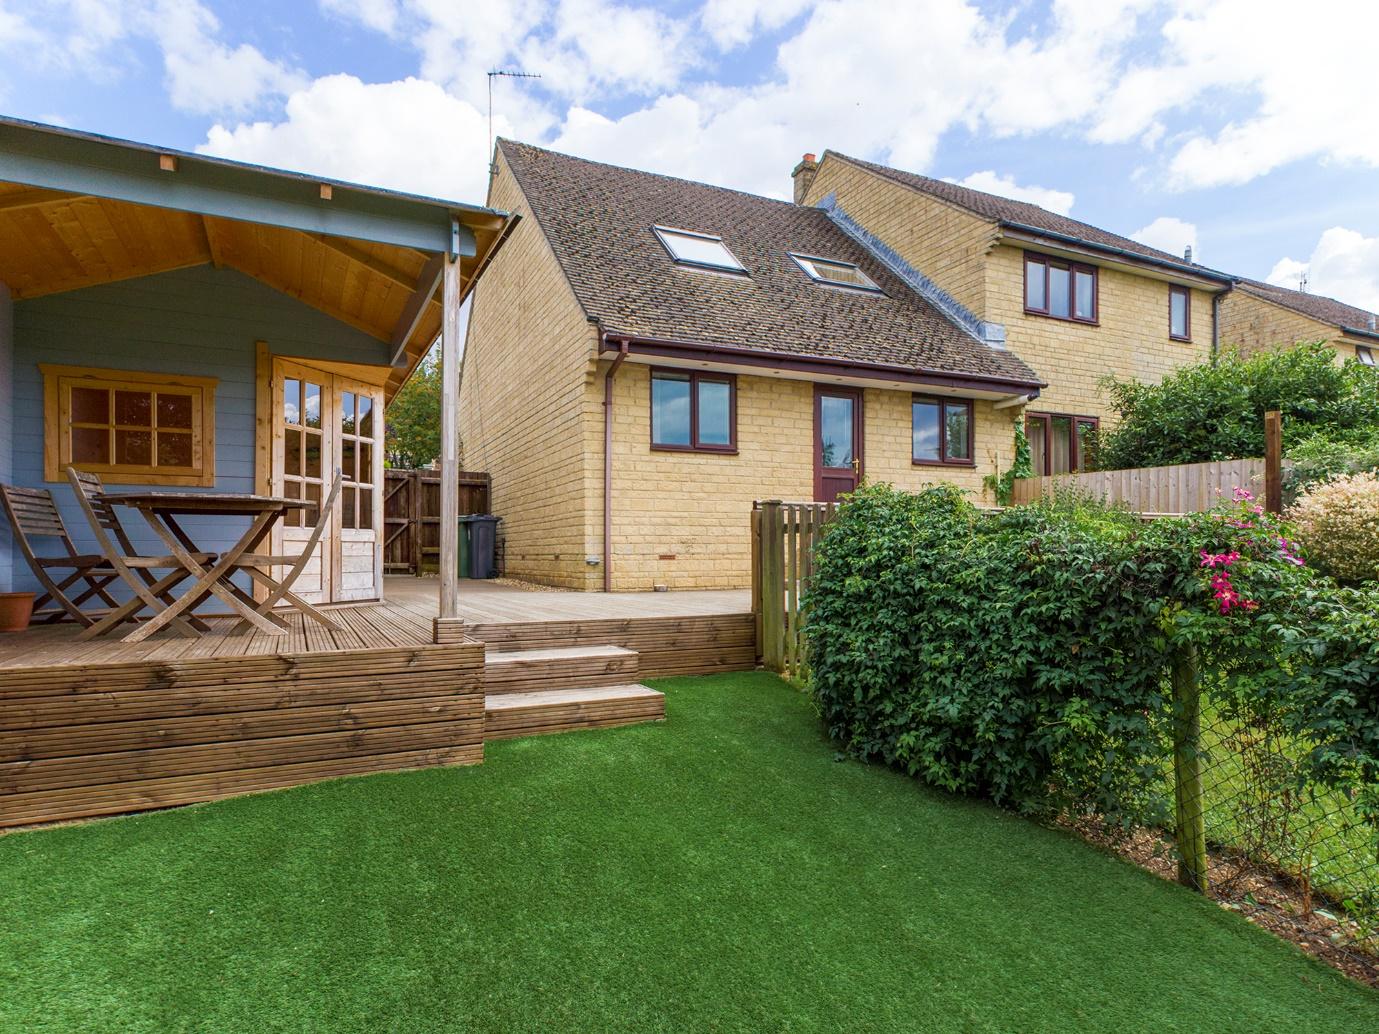 | Property Centre home of the week: the Hawthorns, Bussage - £335,000